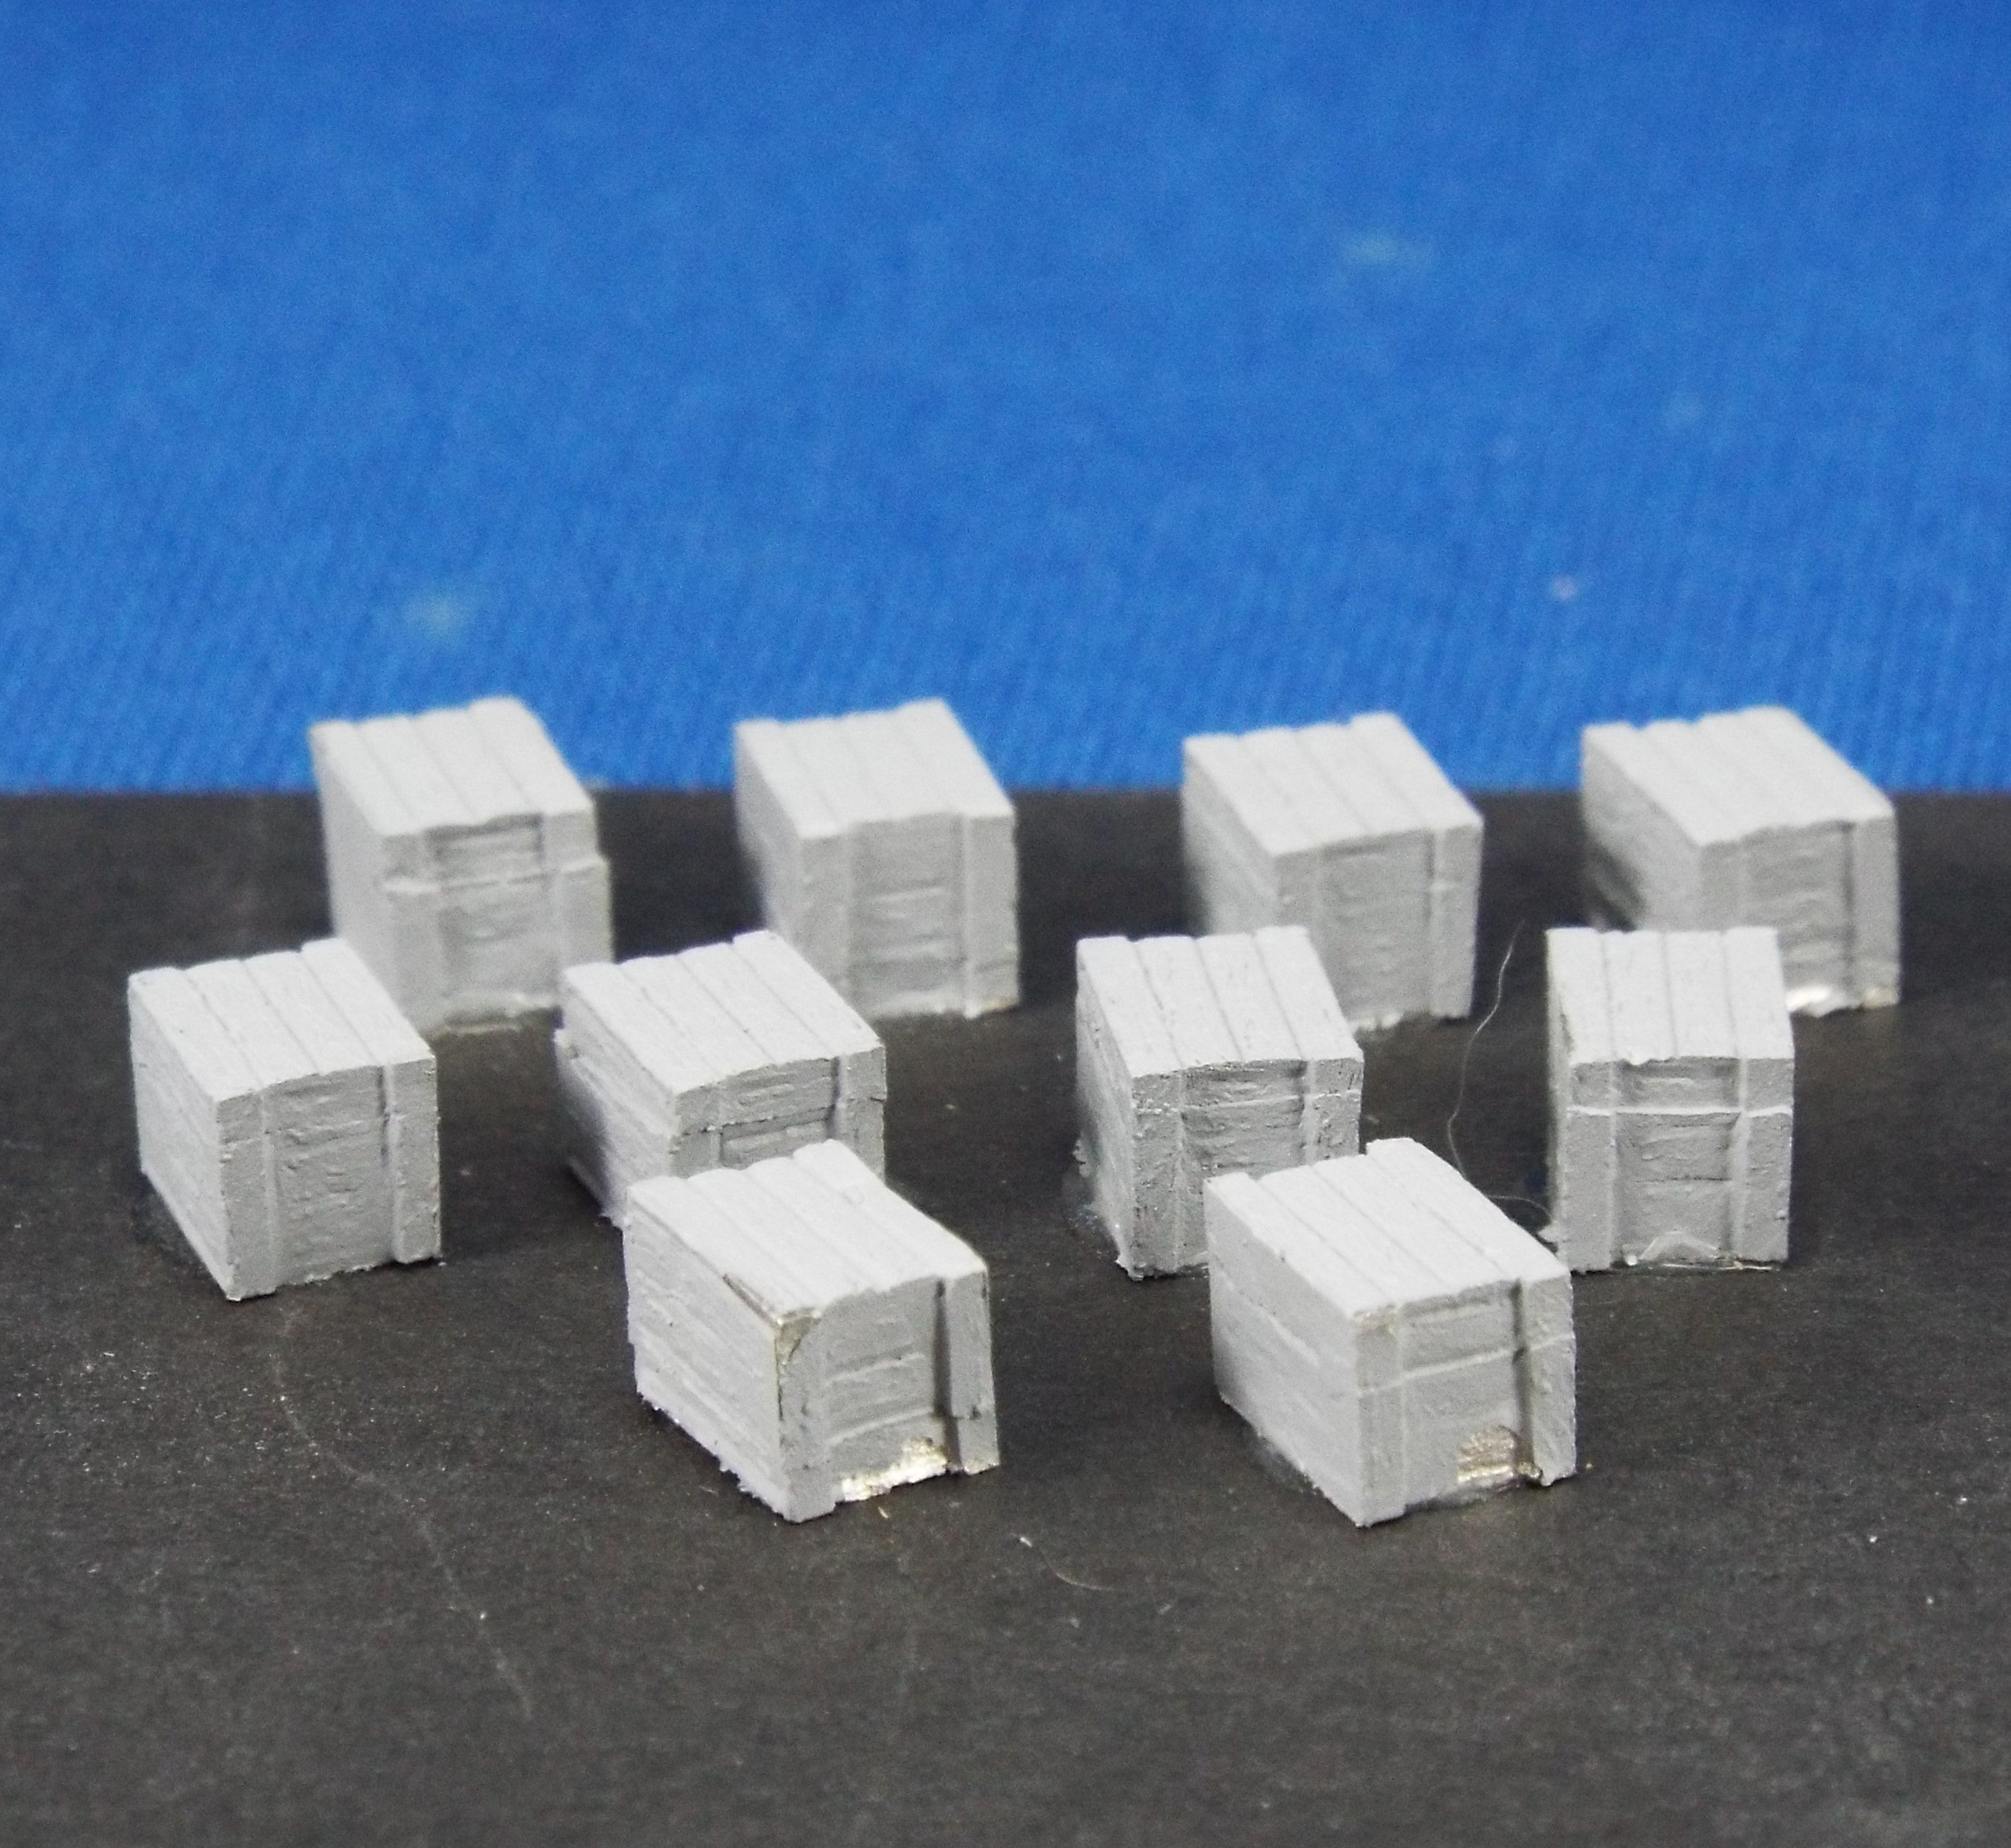 *NEW* Small Wooden Crates (5x5x4mm)